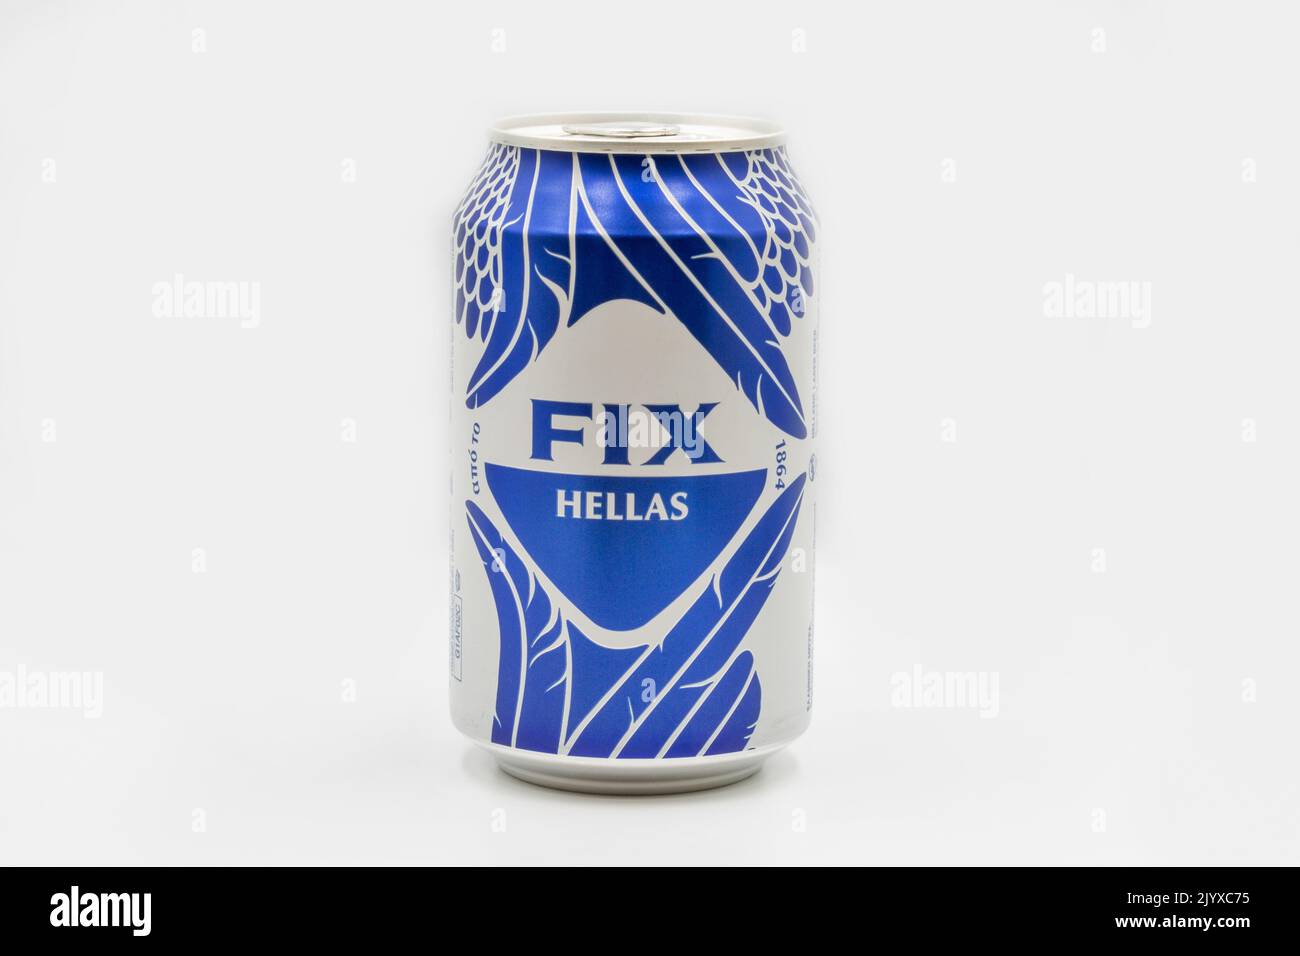 Corfu, Greece - August 05, 2021: Studio shoot of Fix beer can closeup on white. The Fix brewery was founded in 1864 by Johann Karl Fix in Athens and i Stock Photo